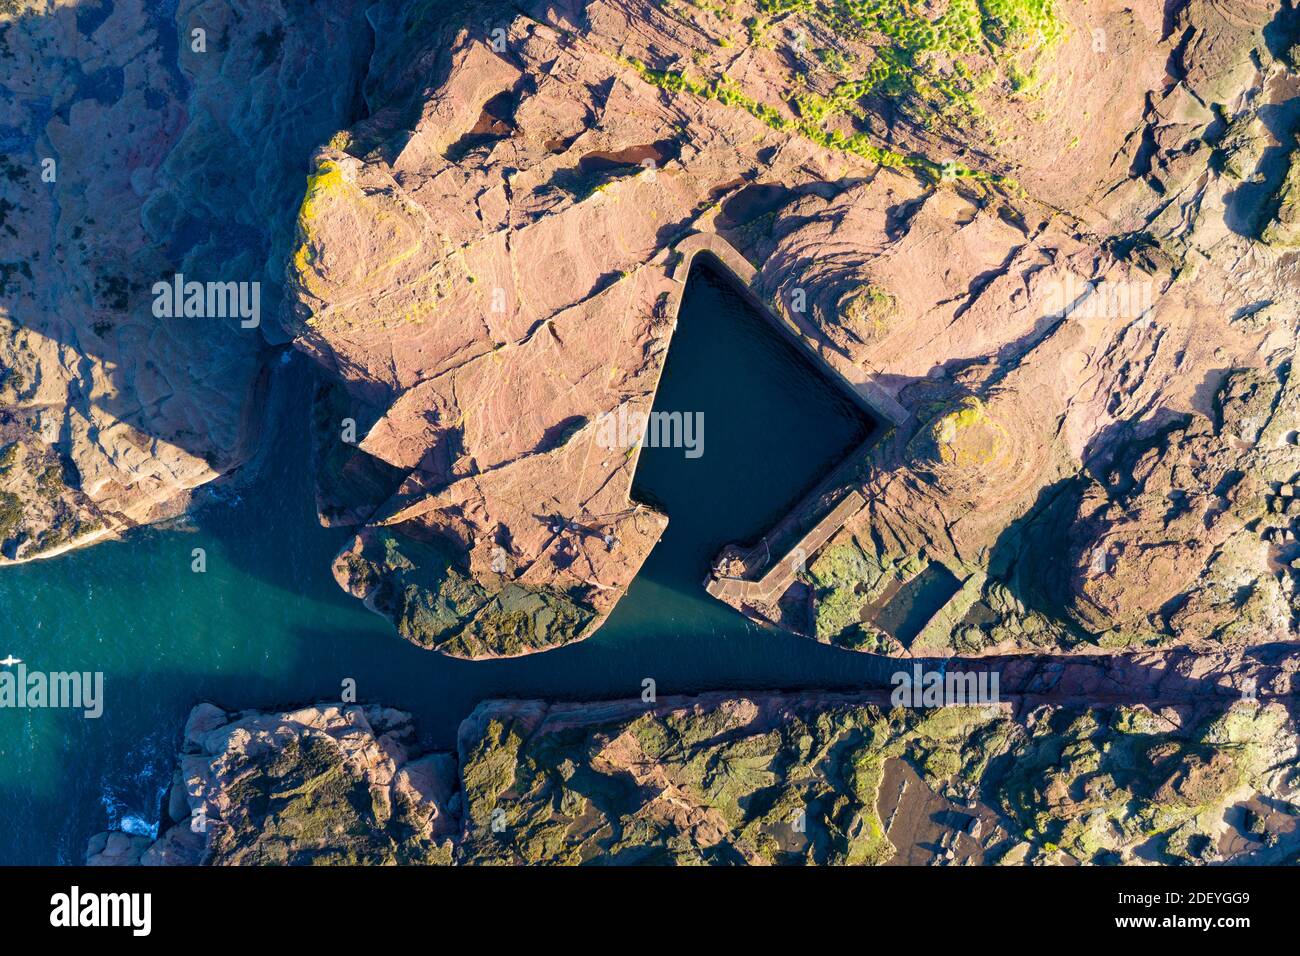 Aerial view of manmade harbour cut out of rock at Seacliff Beach in East Lothian, Scotland, UK Stock Photo